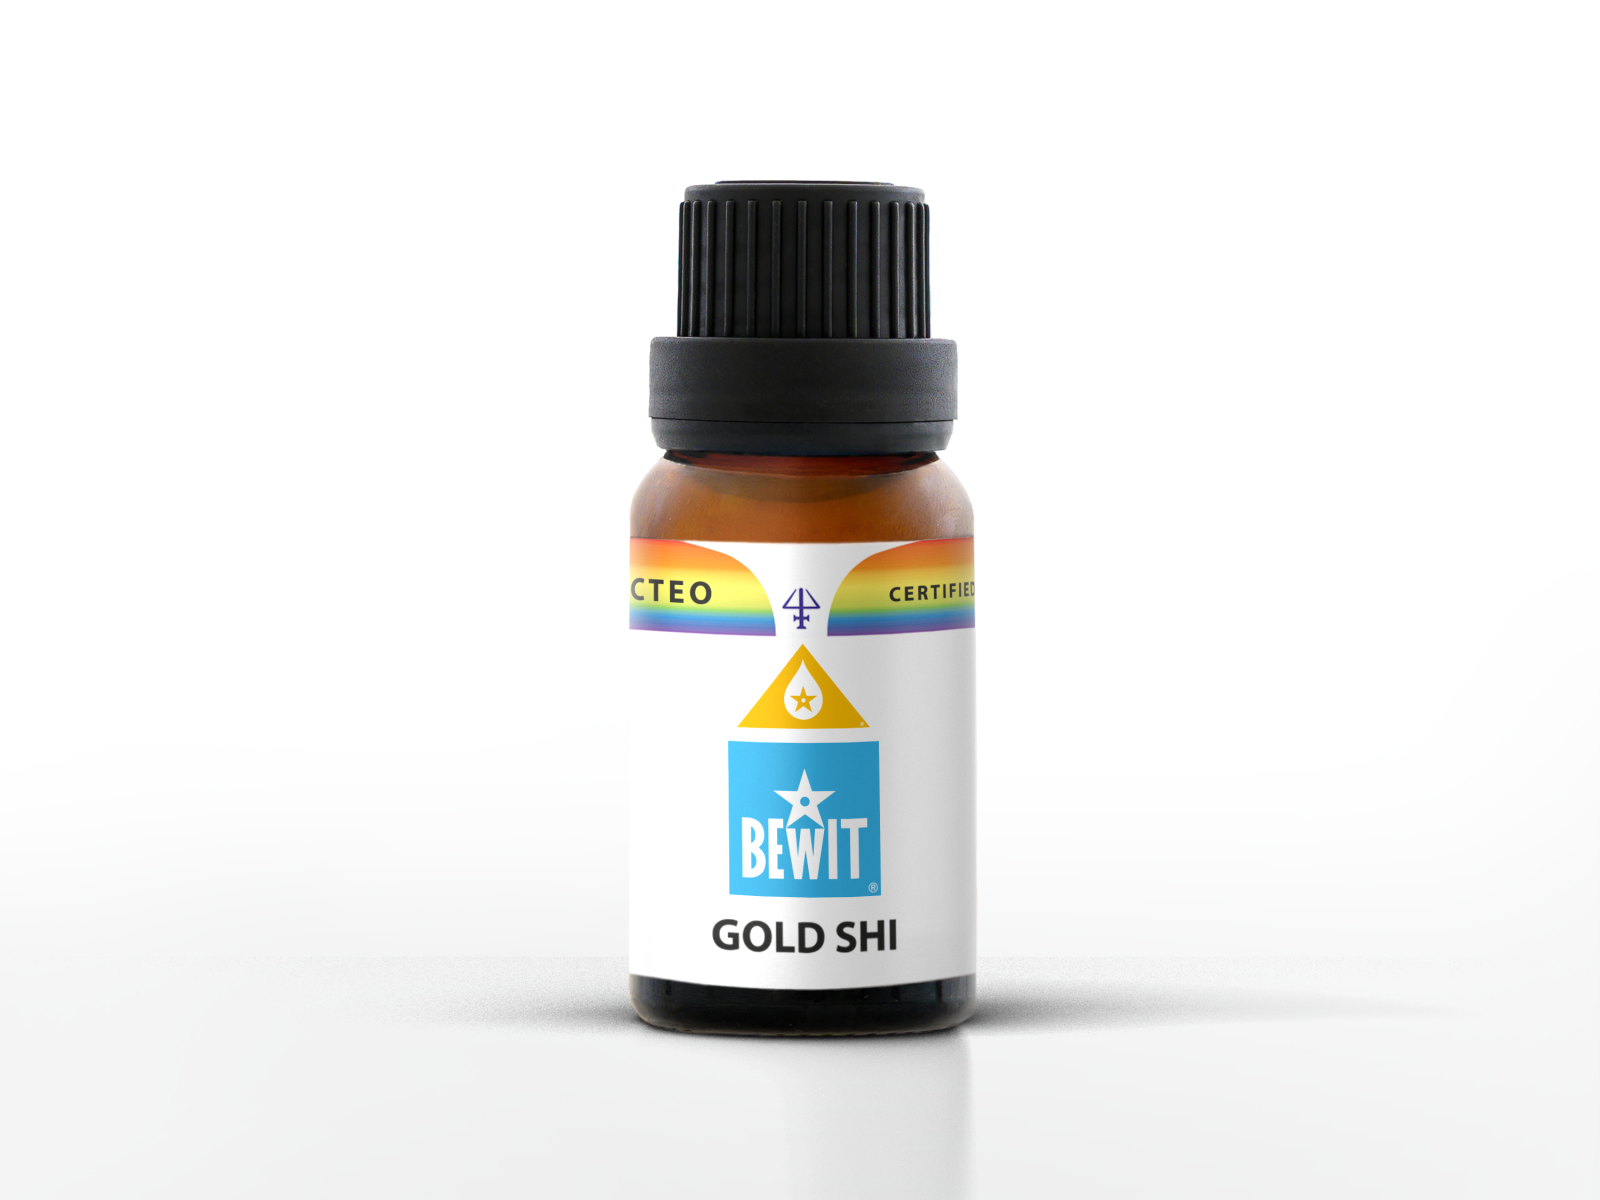 BEWIT GOLD SHI - Blend of essential oils